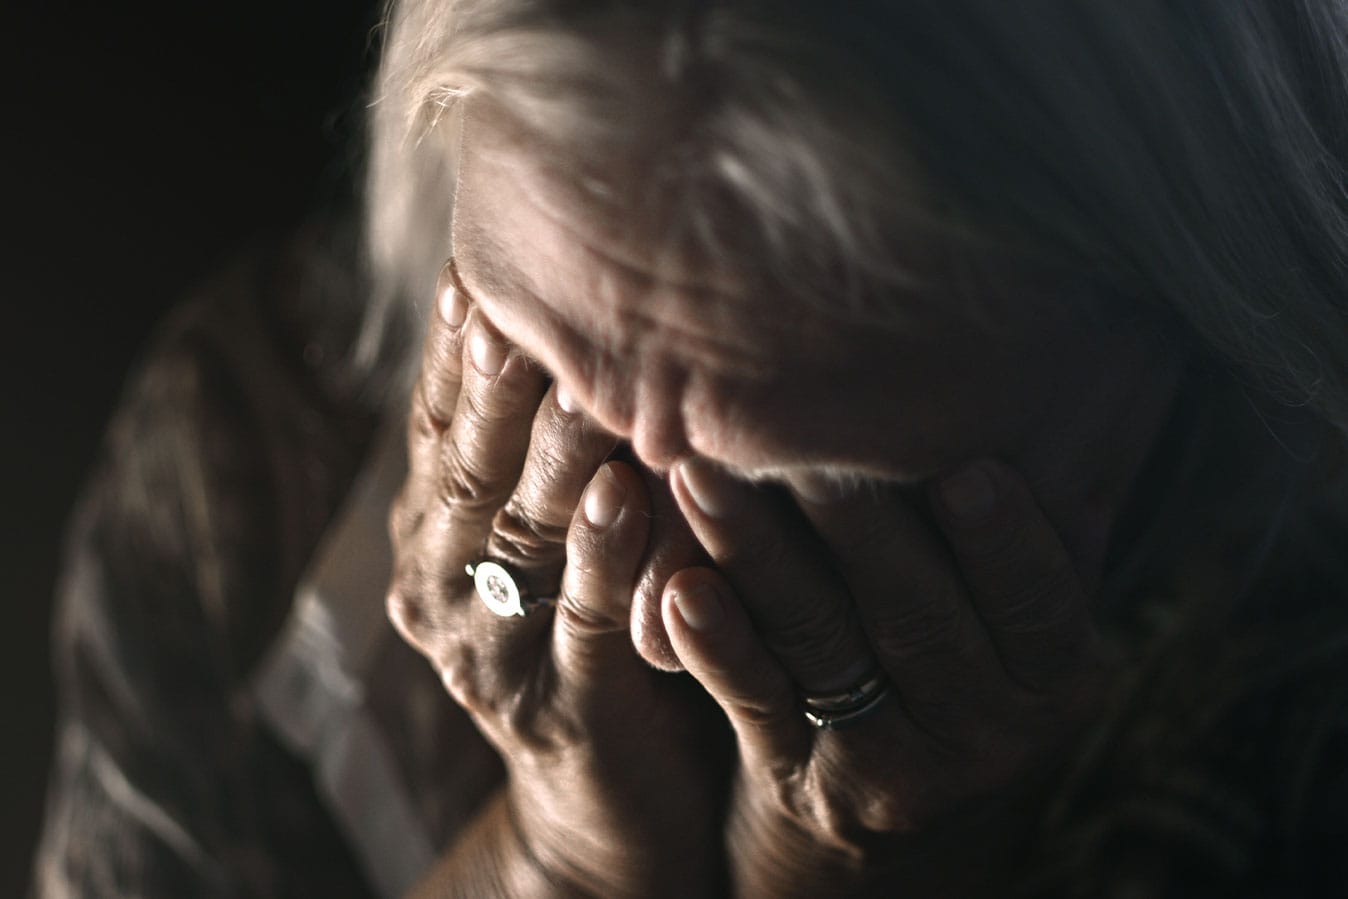 Suffering in silence: The reality of elder abuse